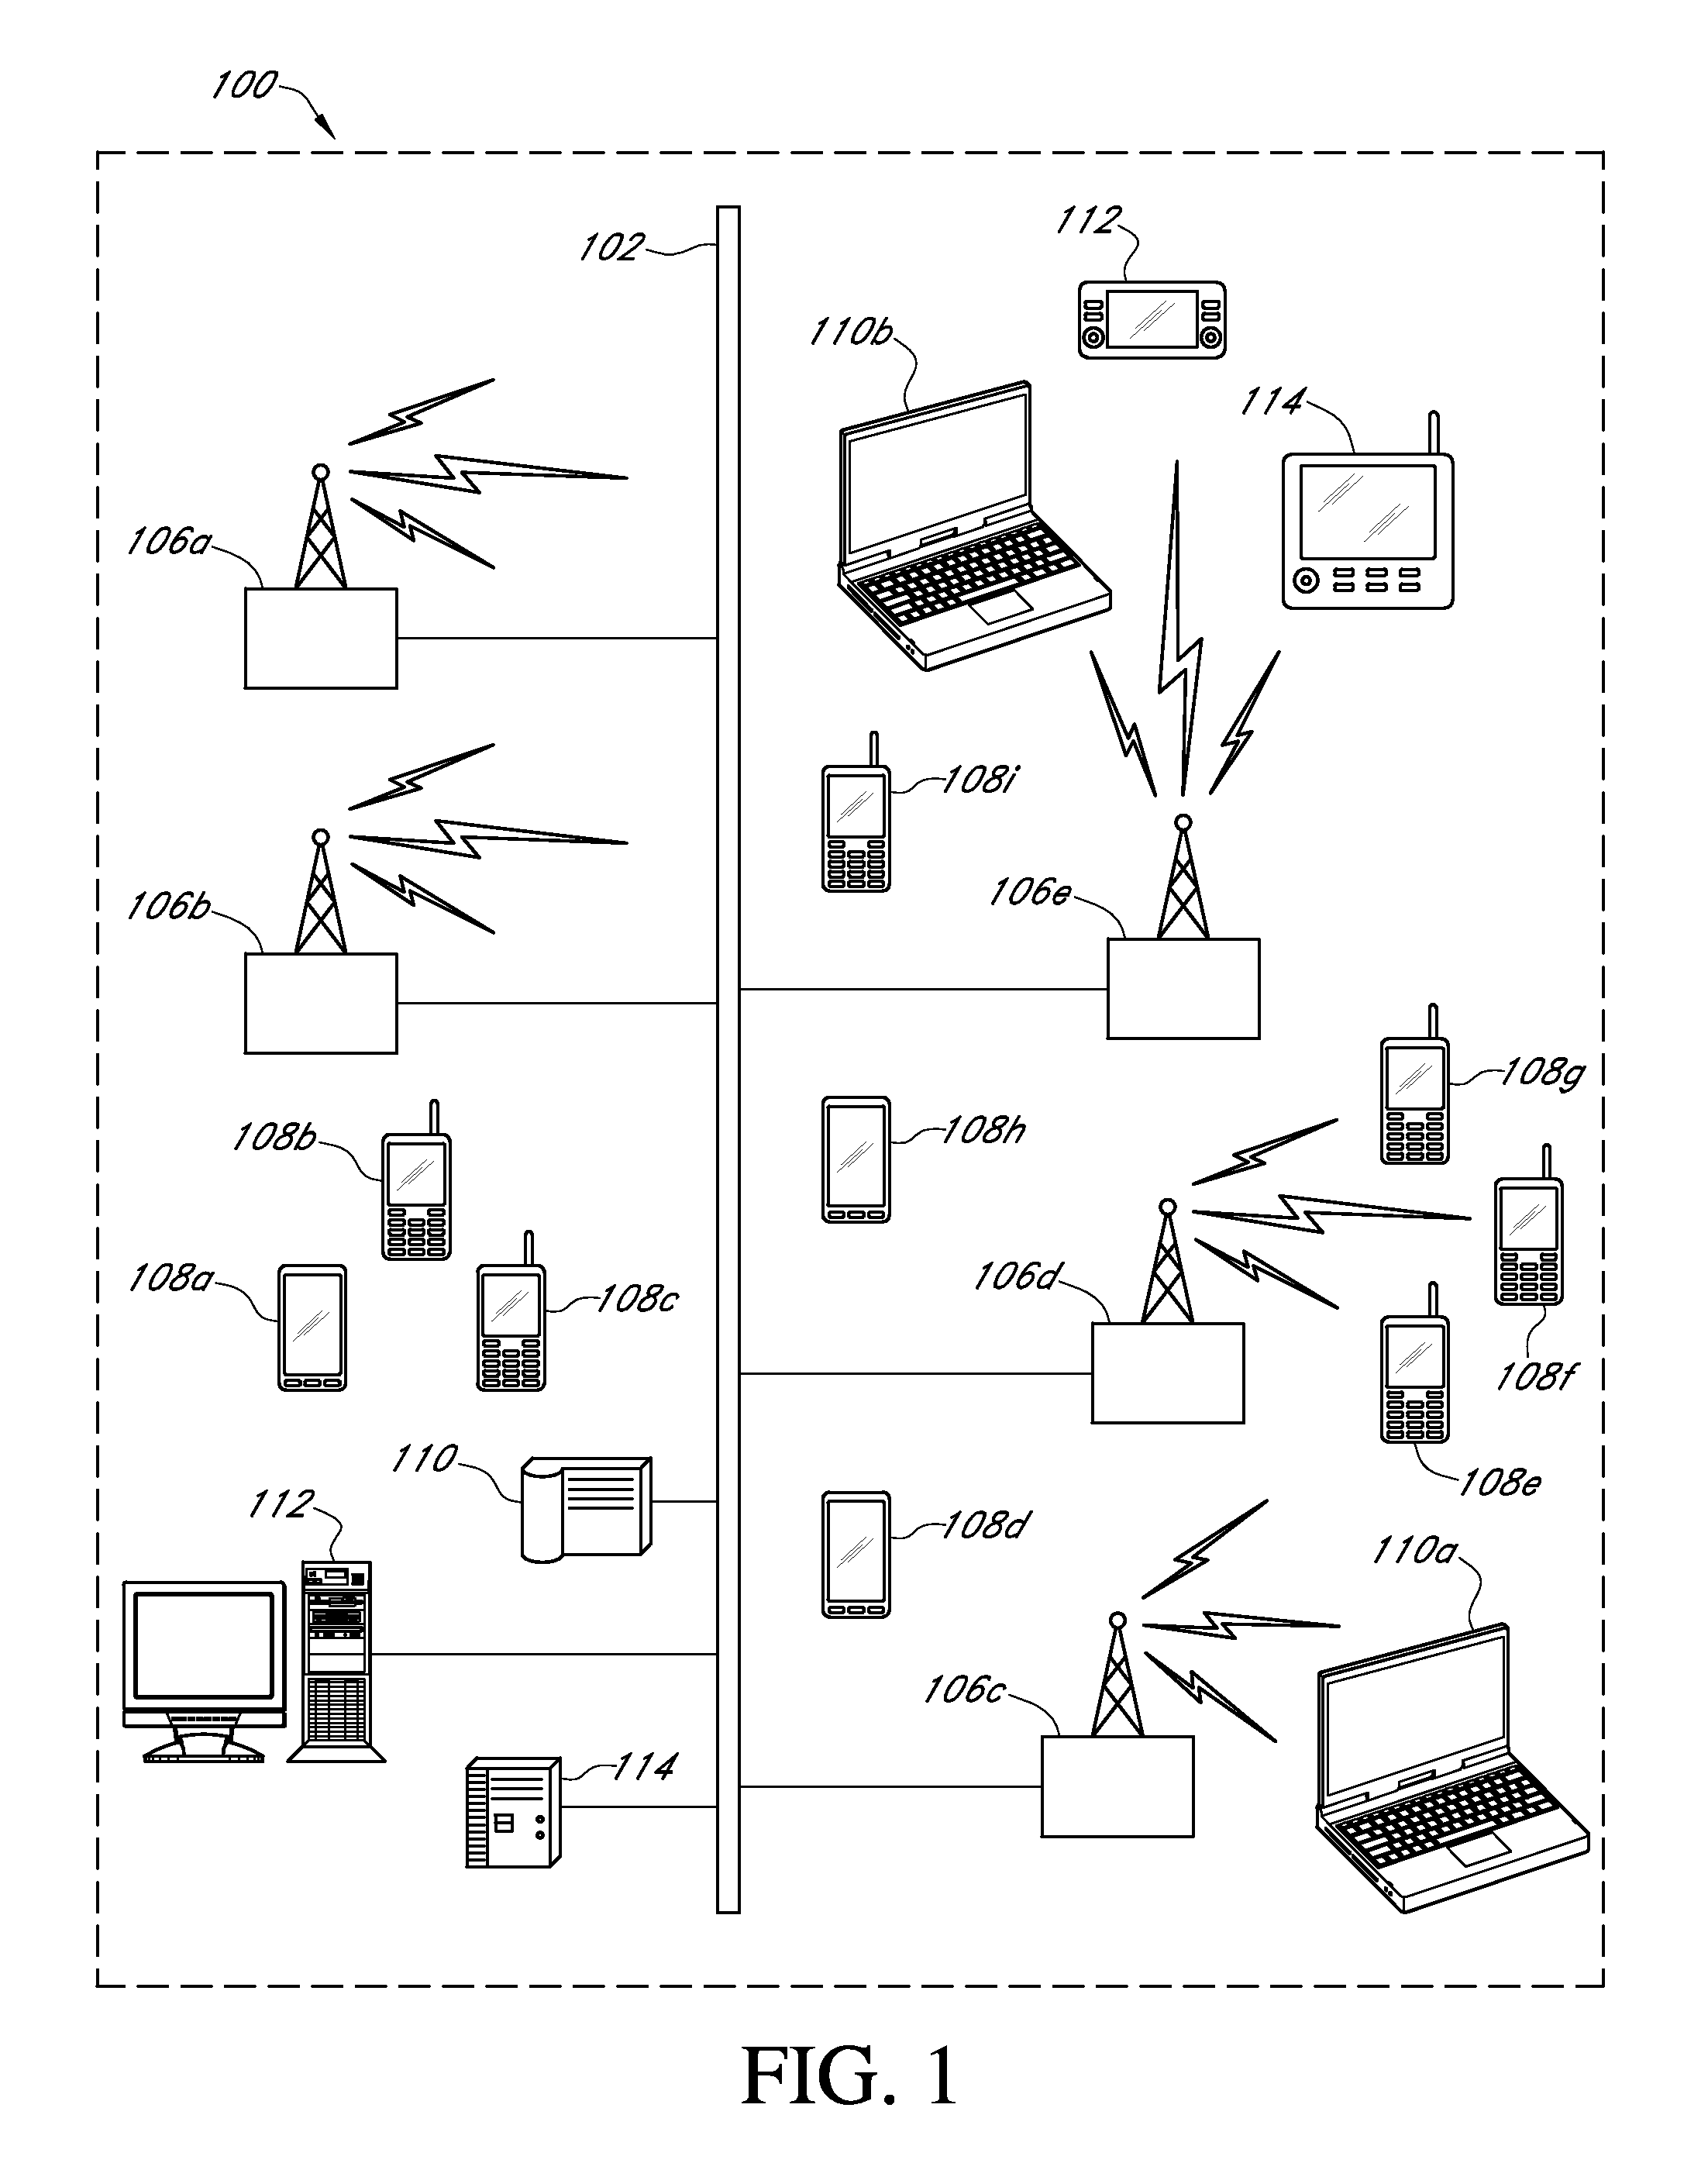 Systems and methods for autonomously determining network capacity and load balancing amongst multiple network cells